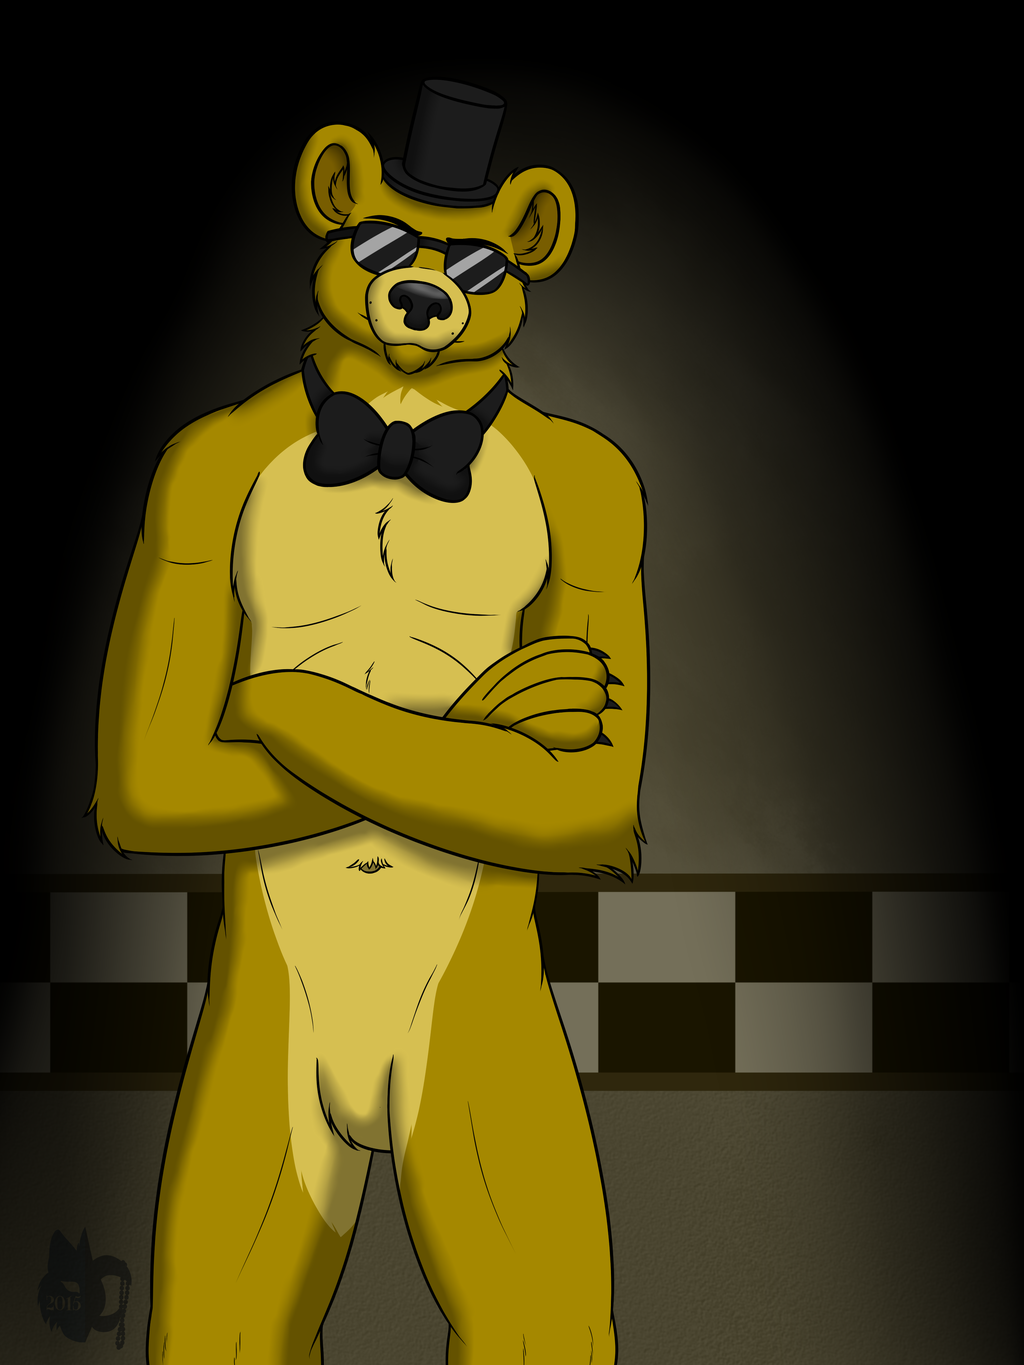 Golden Freddy by Bleuxwolf on